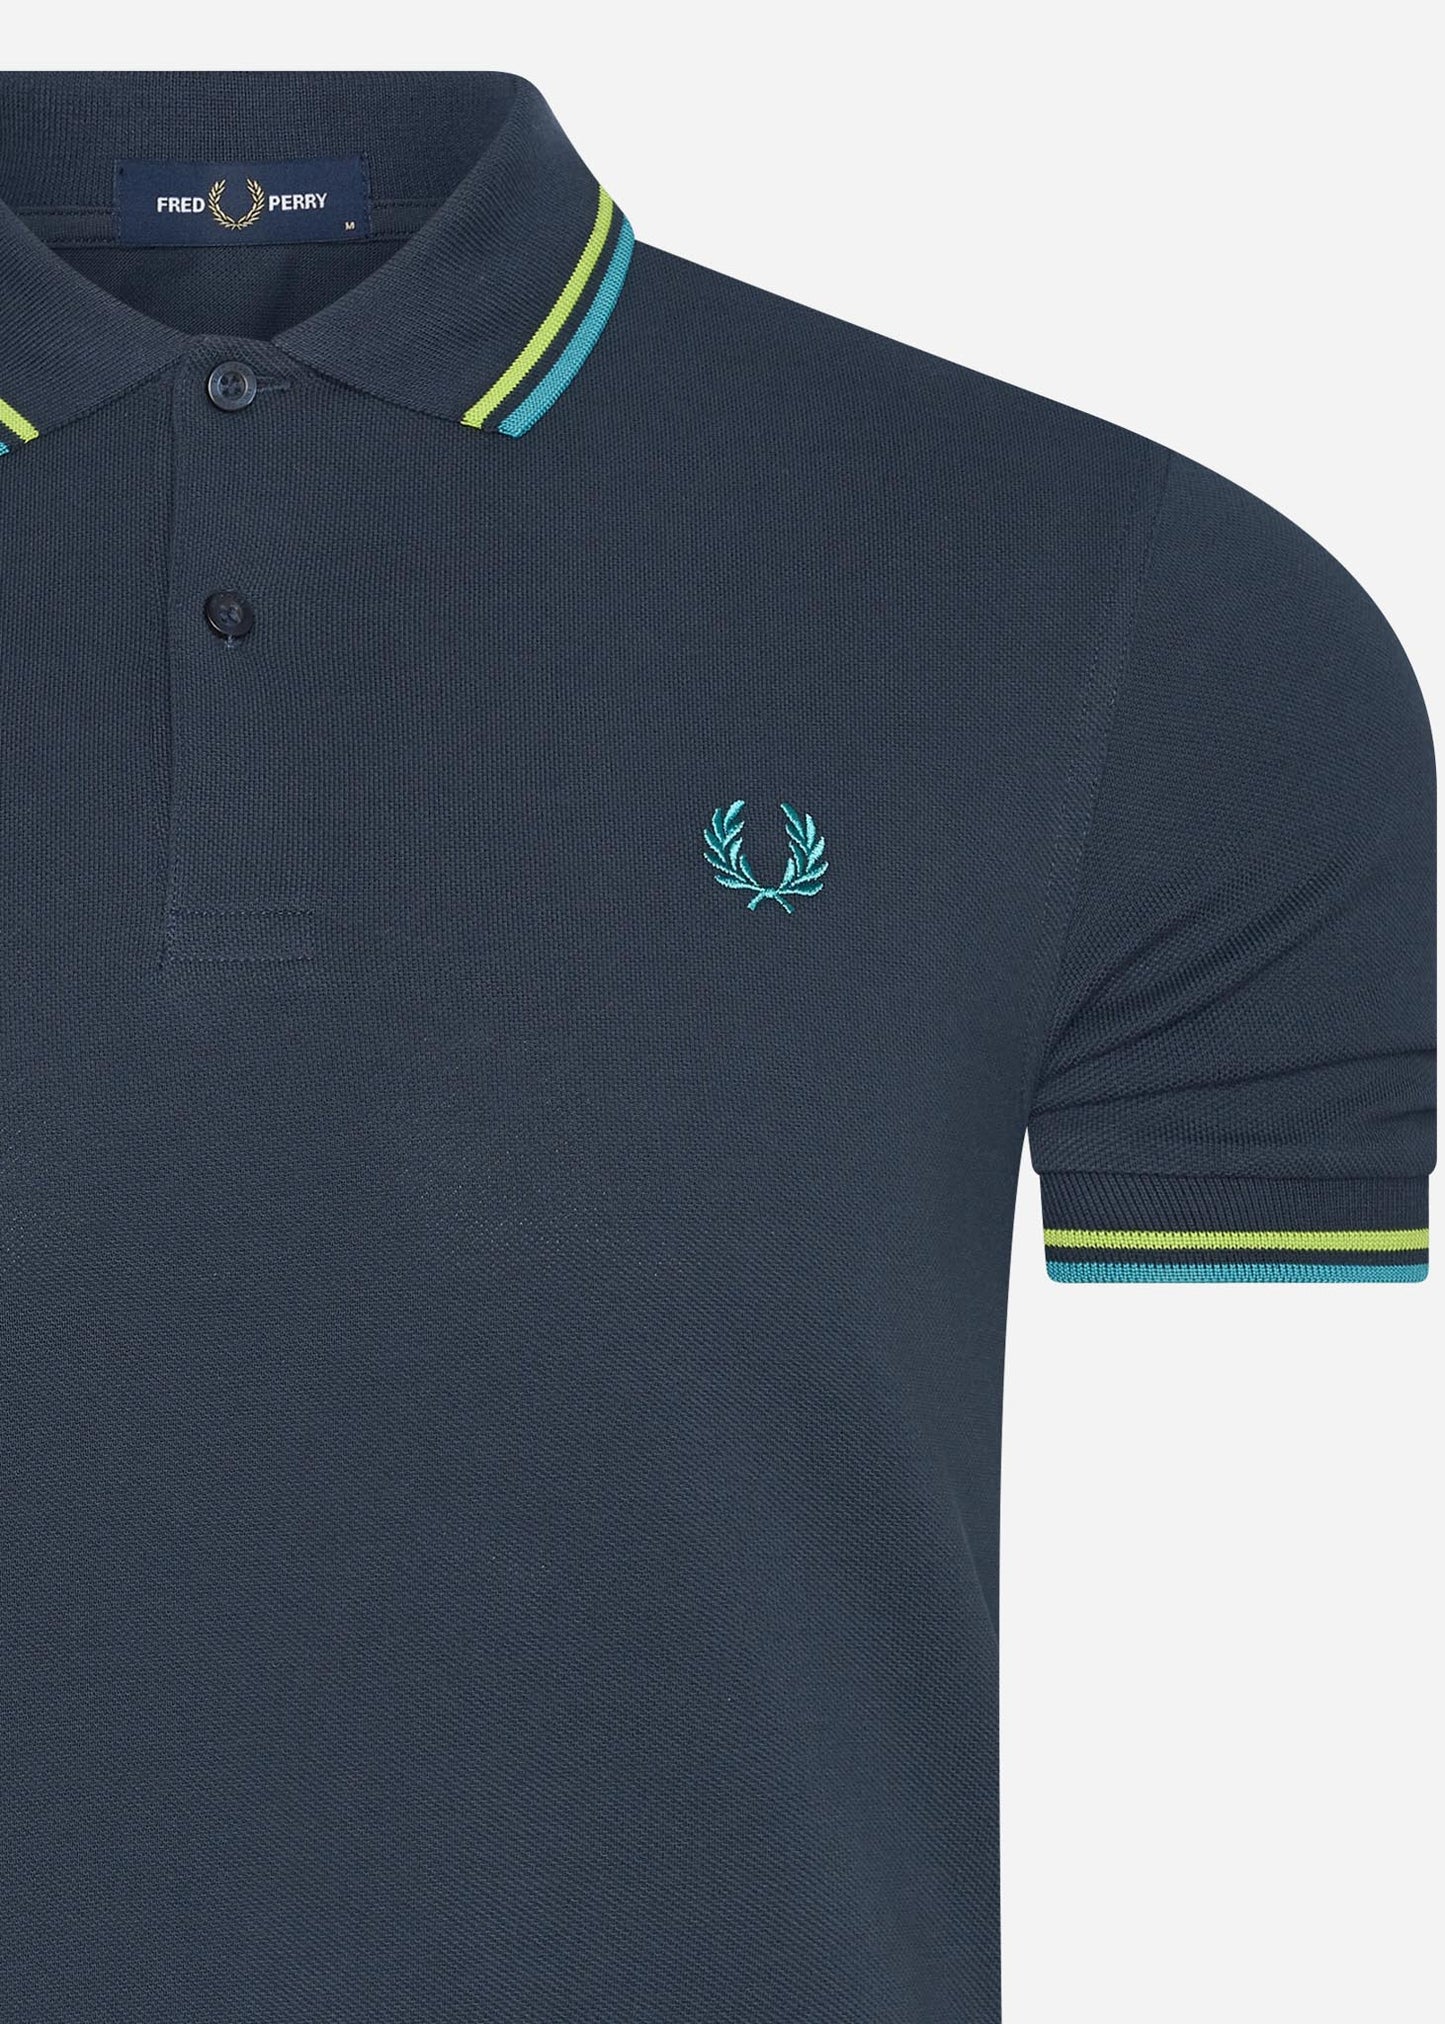 Twin tipped fred perry shirt - drkairf lim sgrn